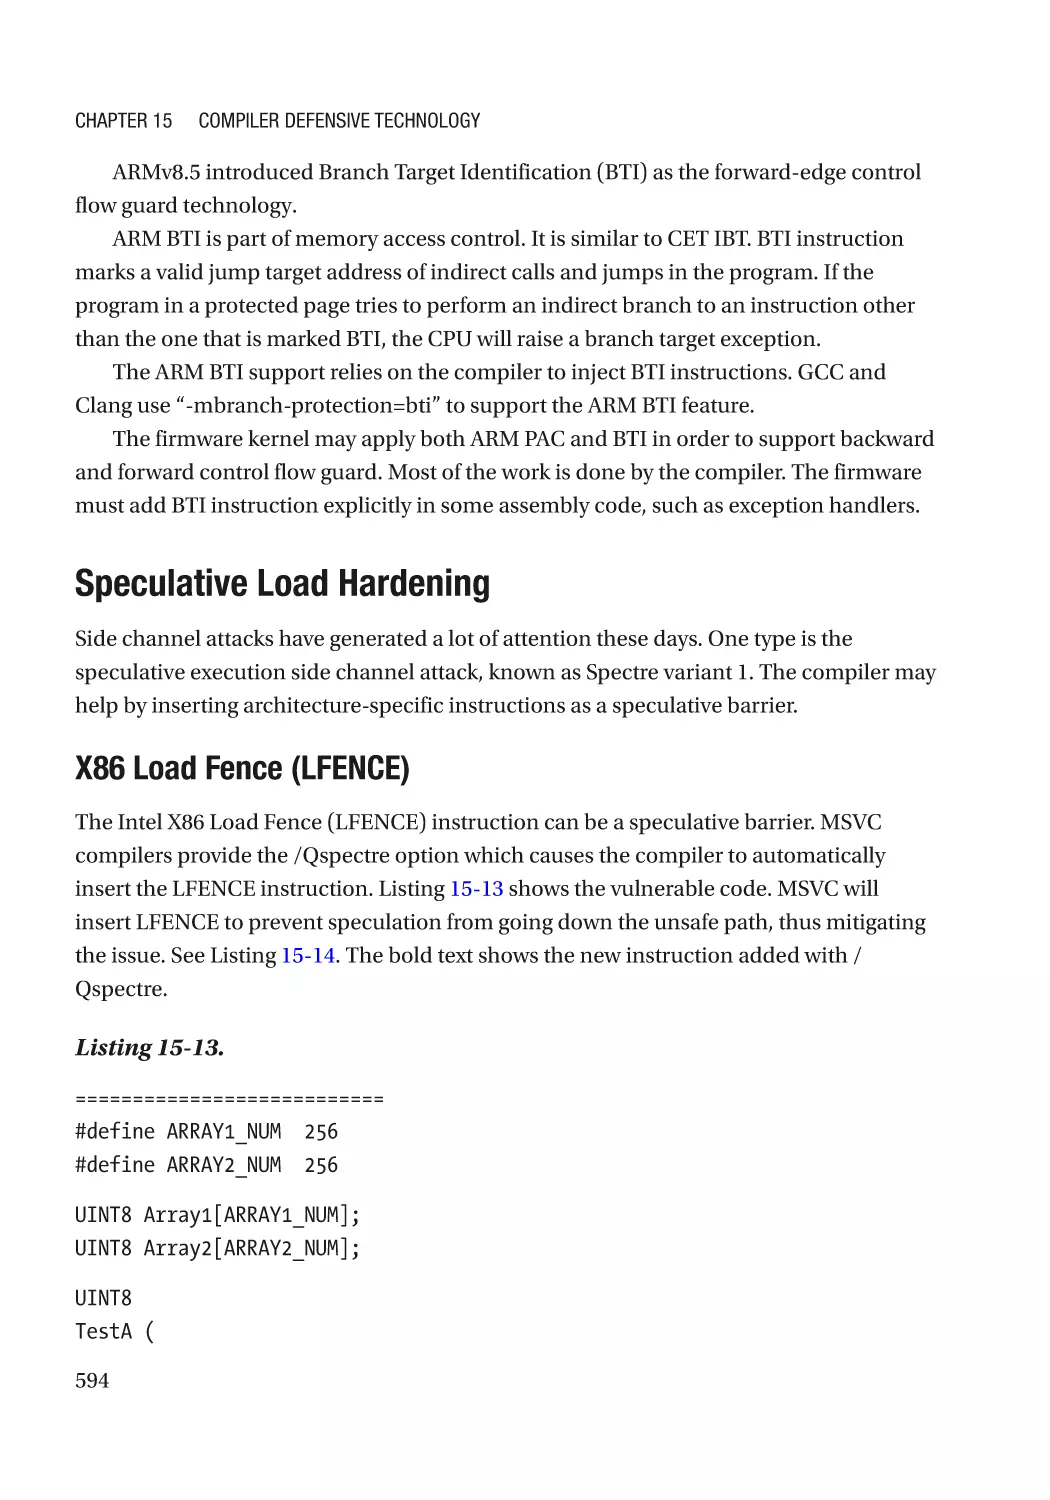 Speculative Load Hardening
X86 Load Fence (LFENCE)